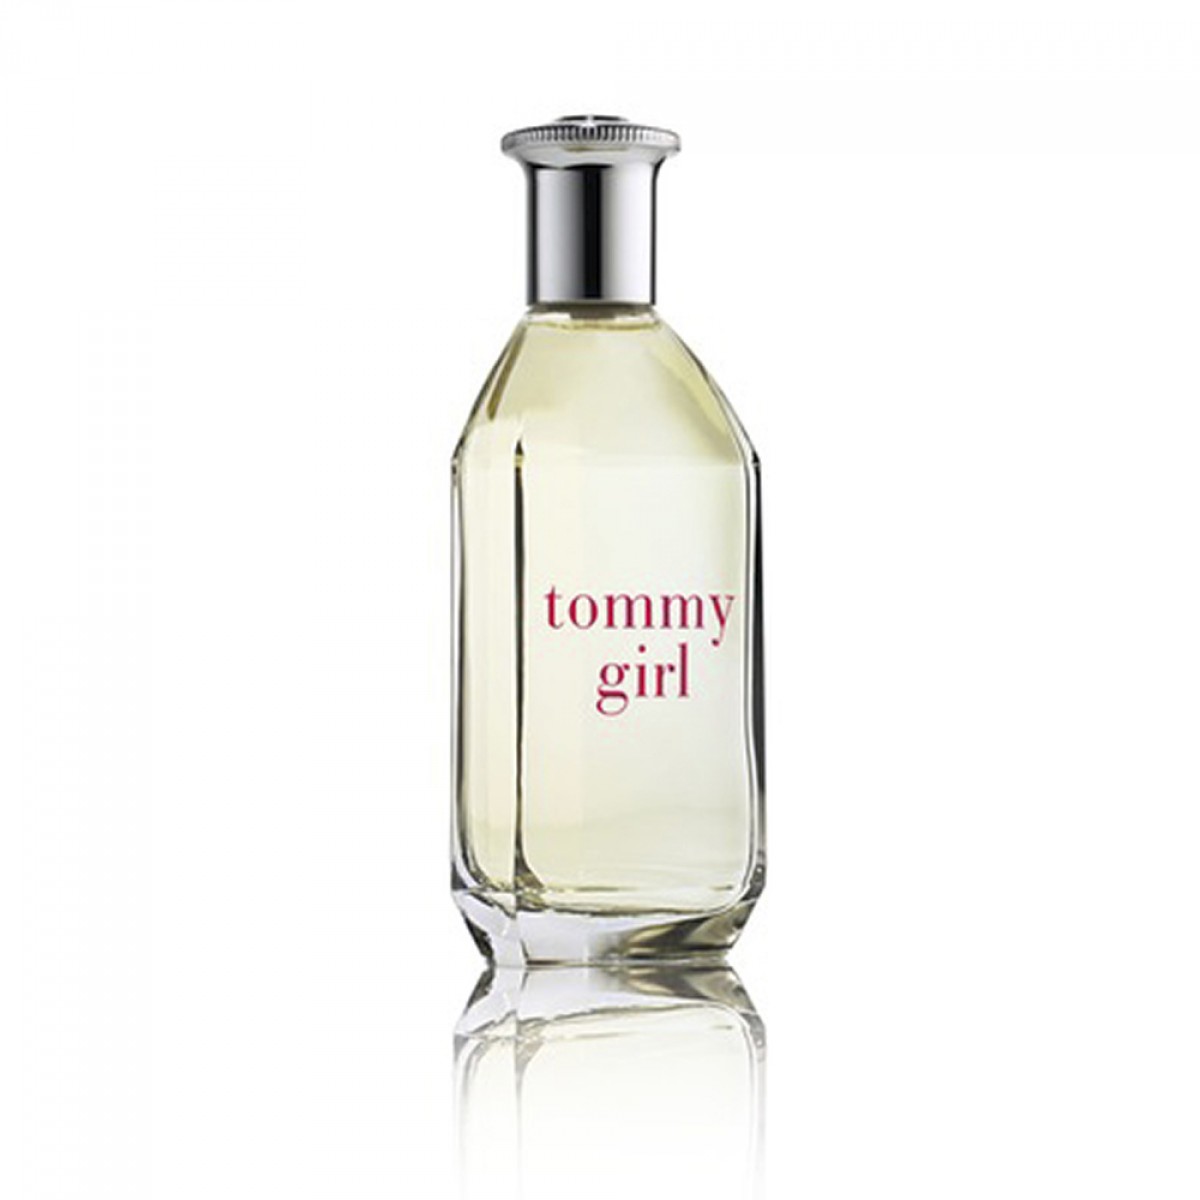 tommy 10 cologne